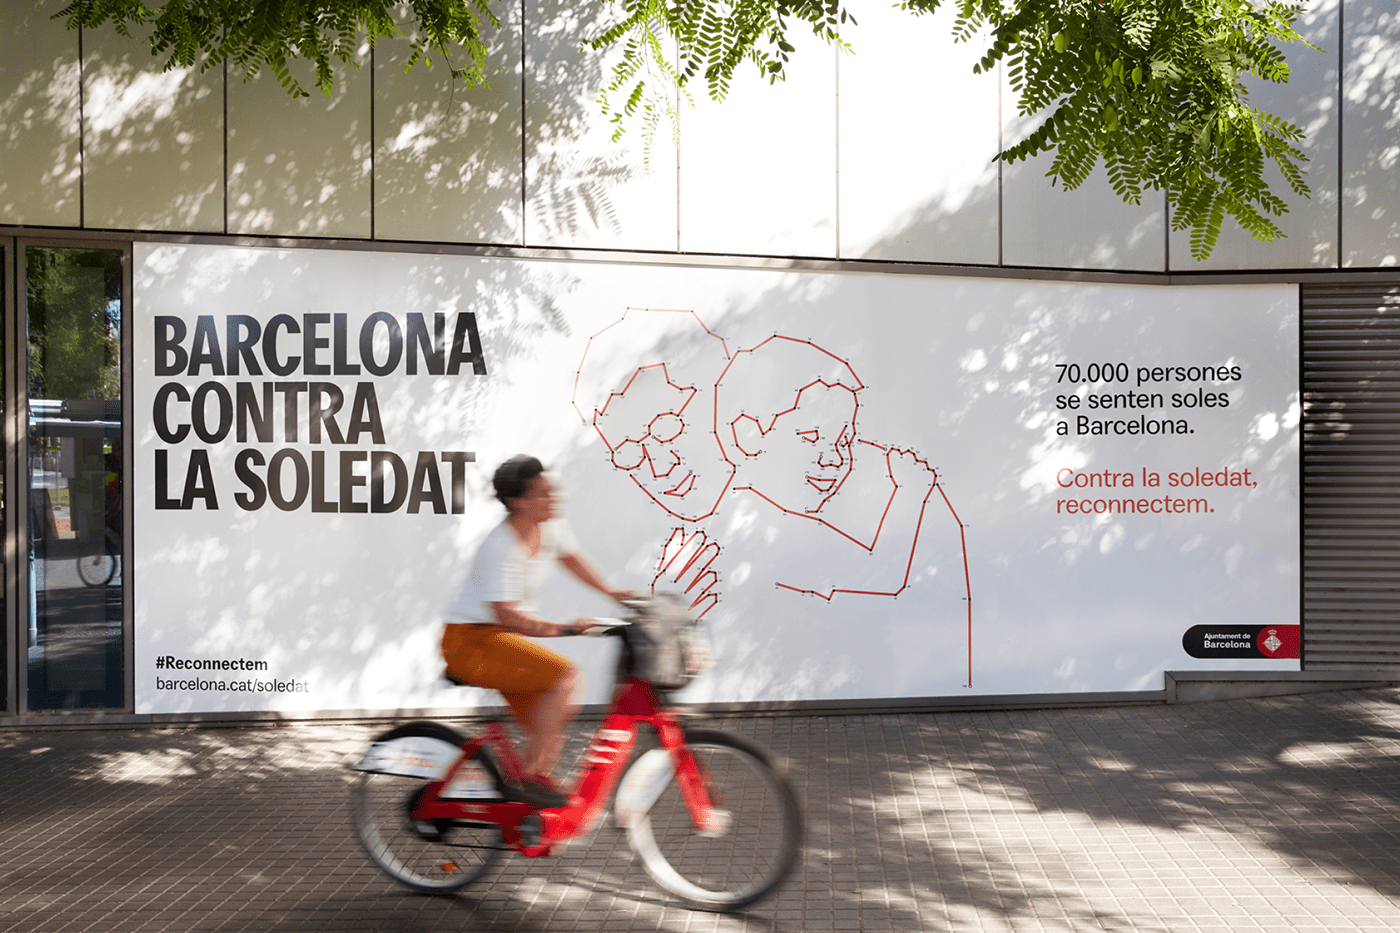 Visualizing the Loneliness mood and feel in Barcelona. Barcelona fight against loneliness.